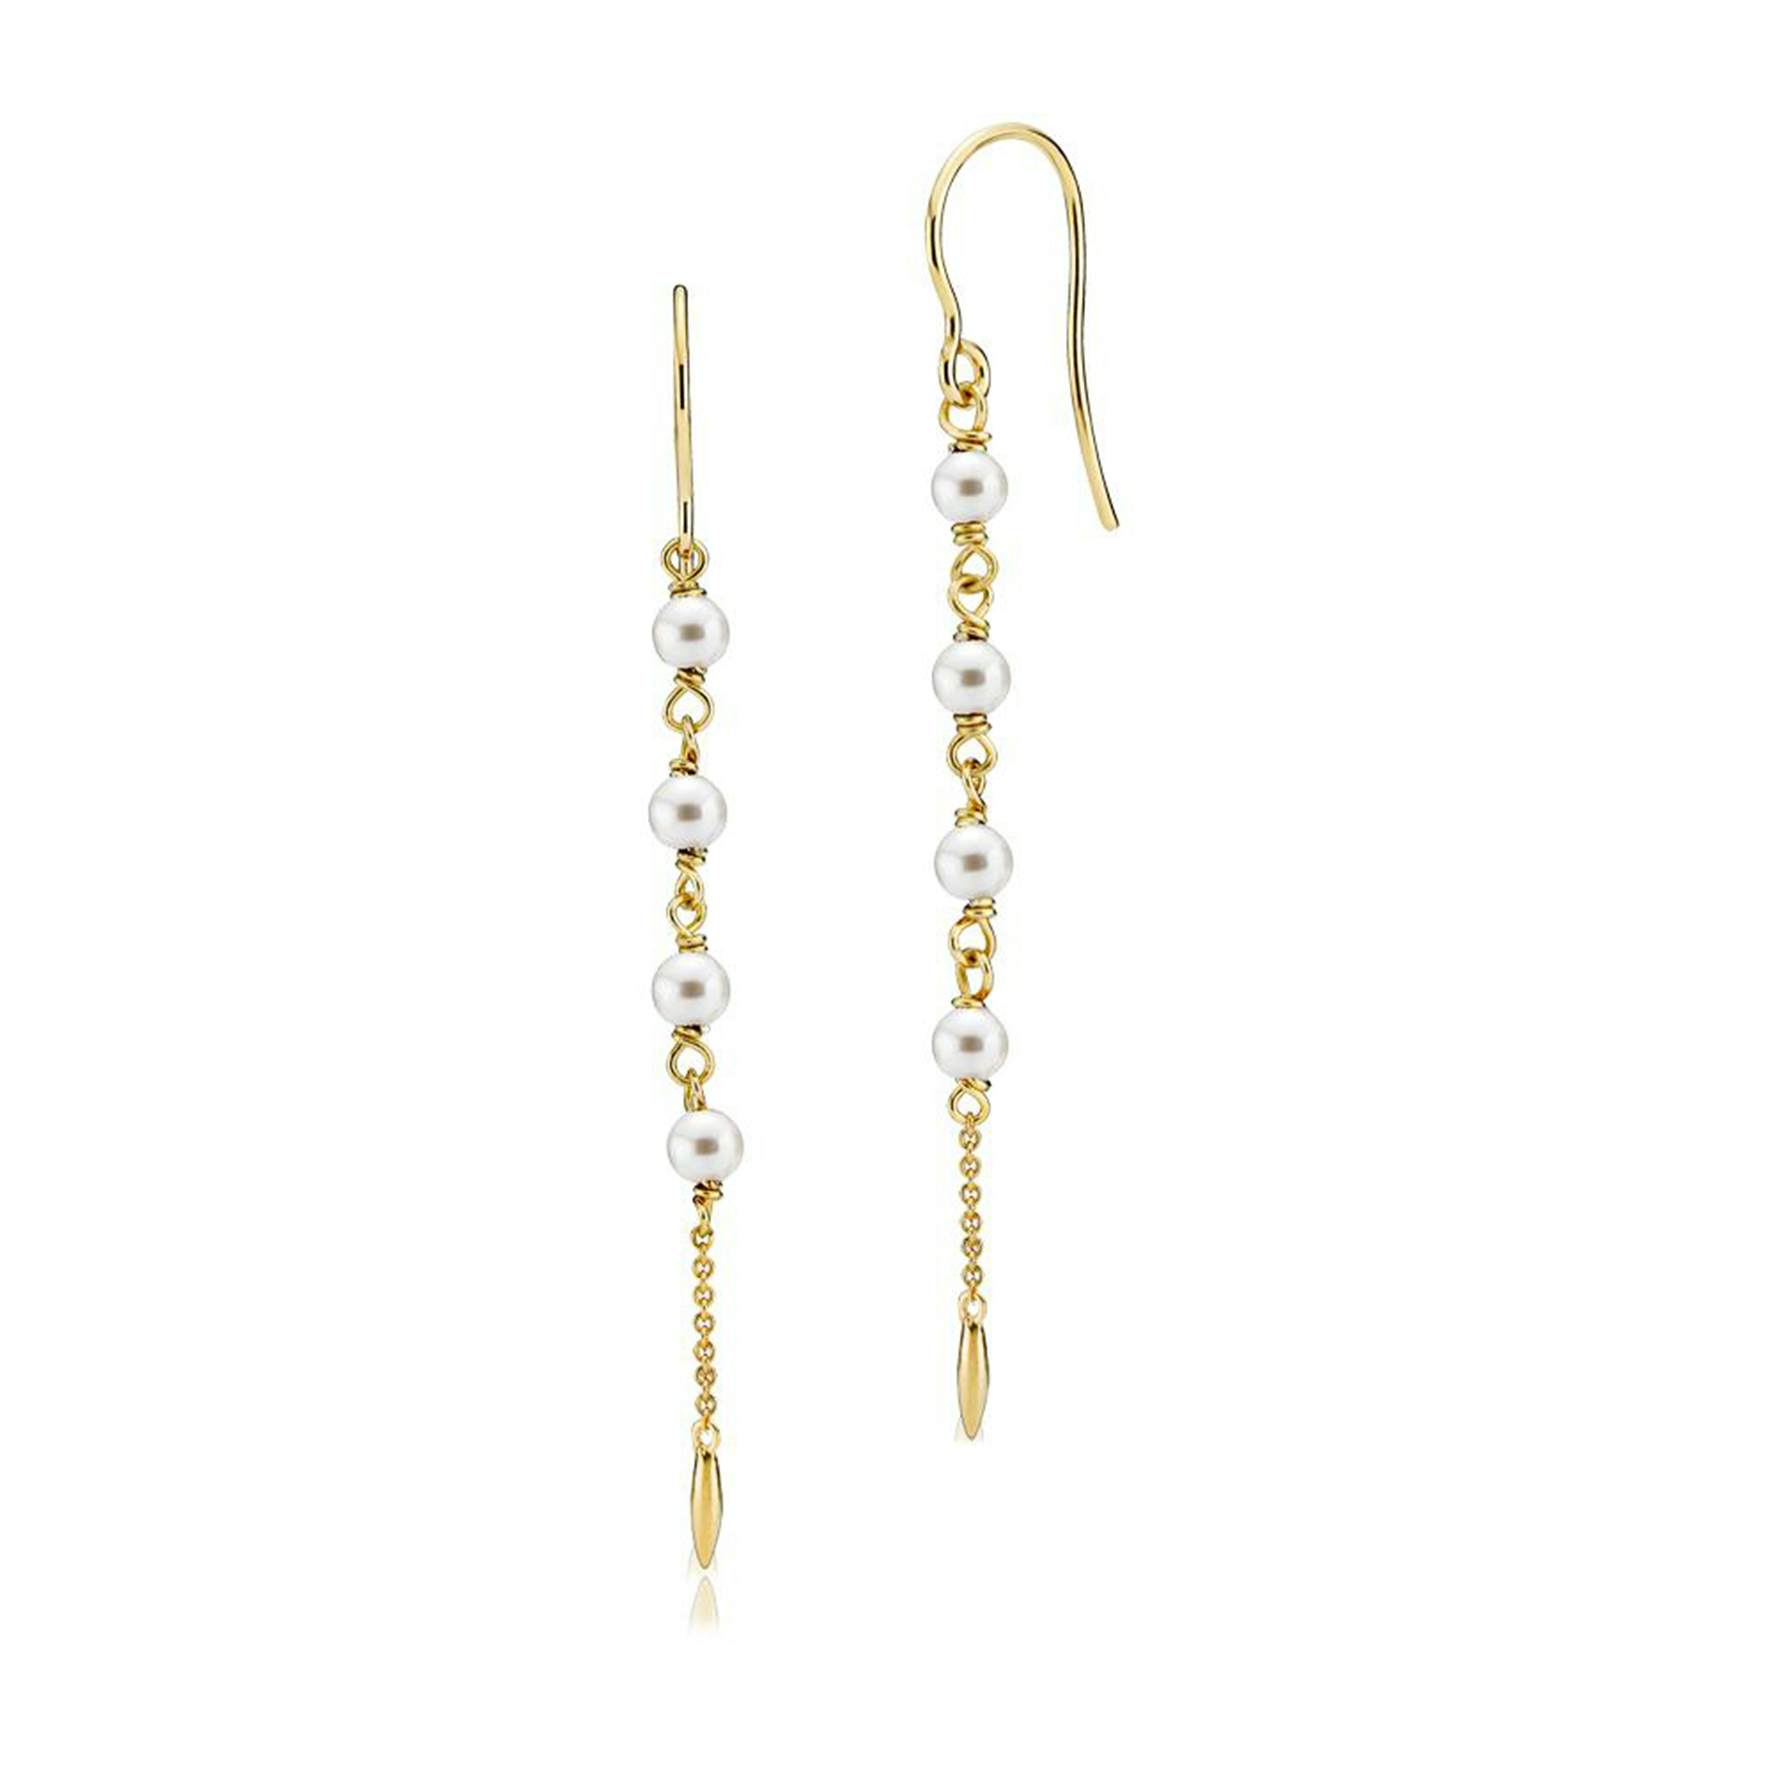 India Freshwater Pearl Earchains from Sistie in Goldplated-Silver Sterling 925